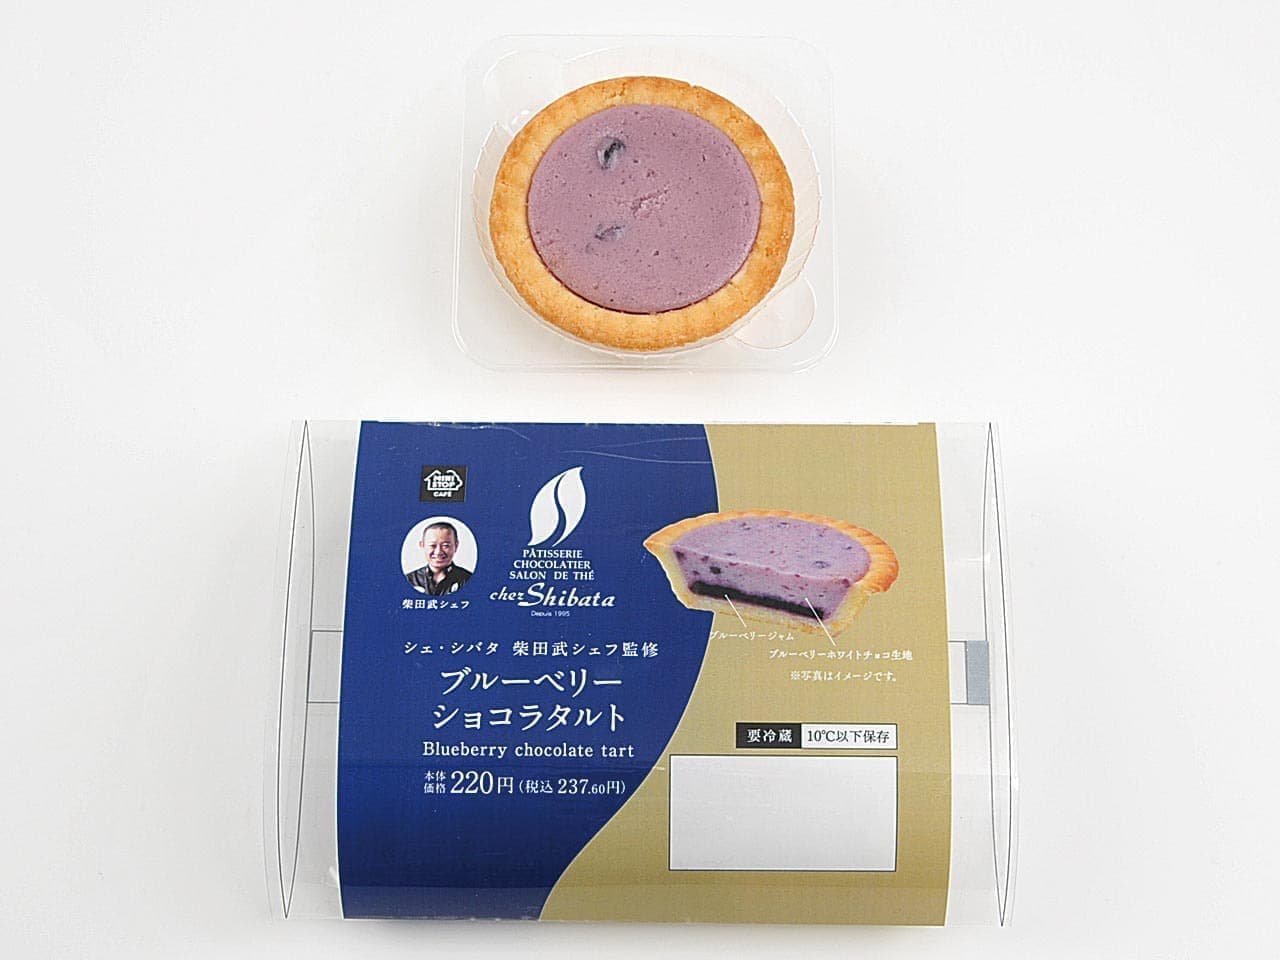 Ministop "Blueberry Chocolate Tart" package